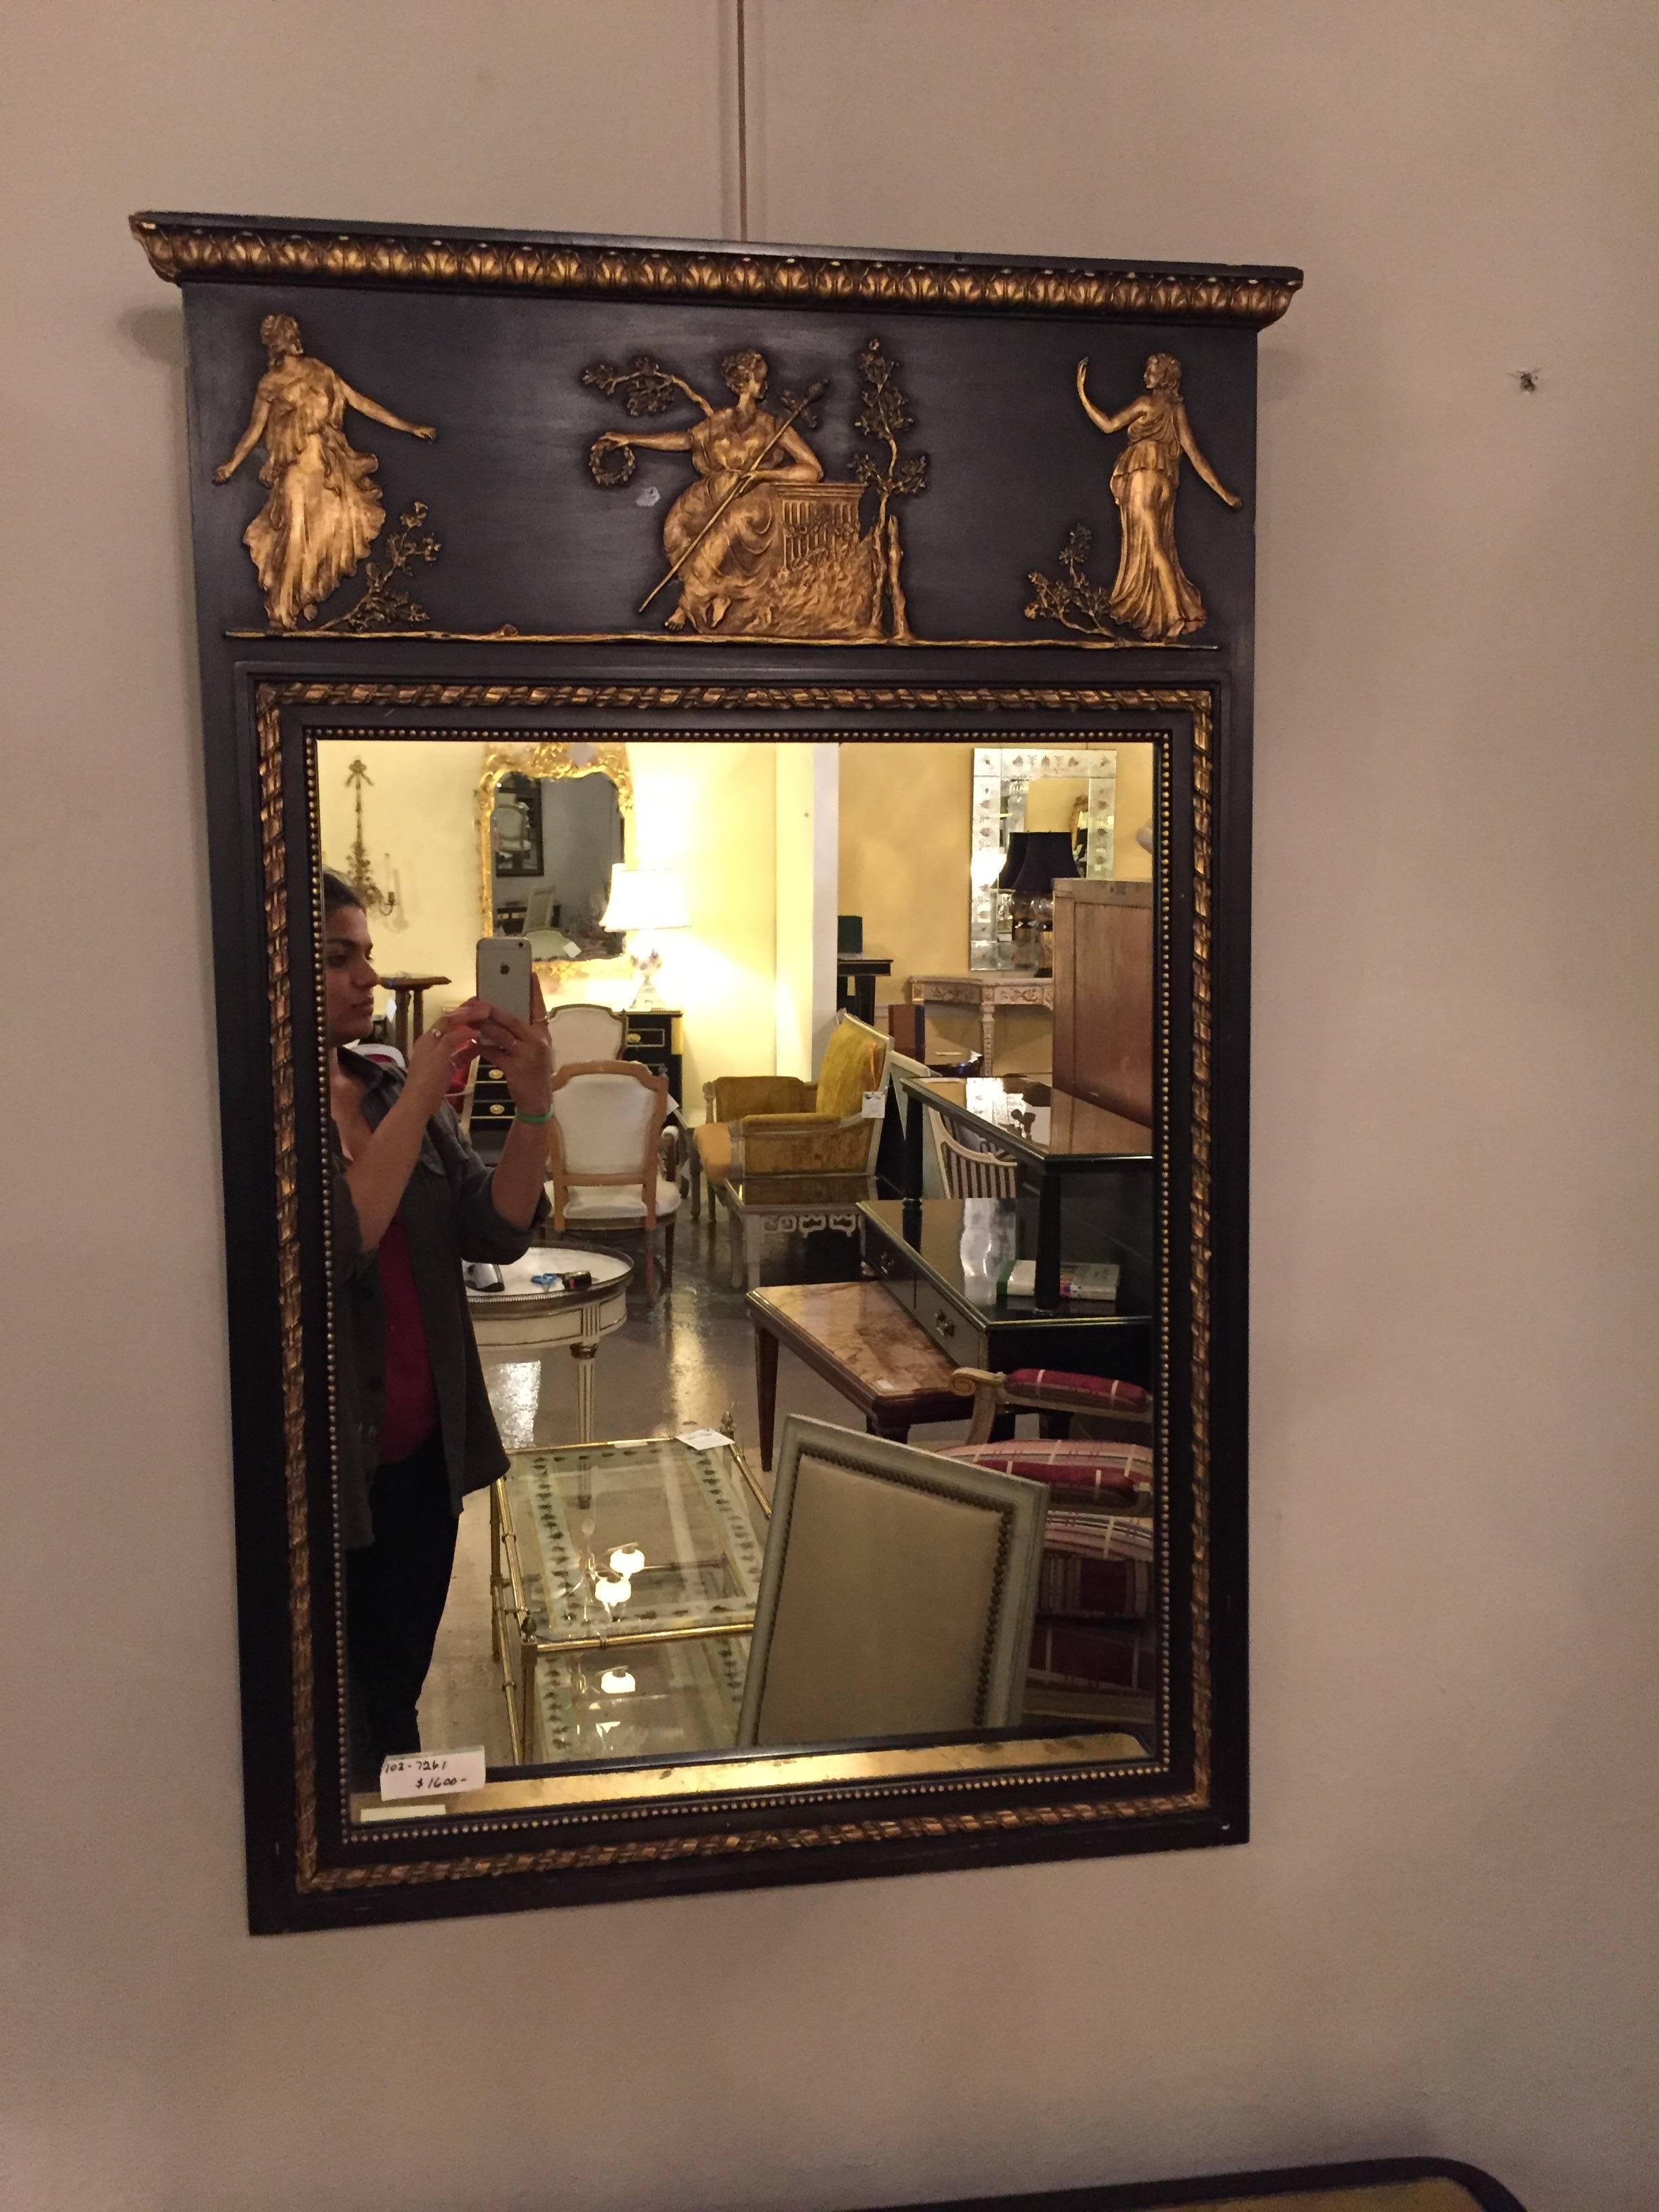 Ebonized neoclassical mirror by Friedman Brothers depicting dancing and musical playing maidens. The center beveled mirror in a finely carved ebony and gilt decorated frame.